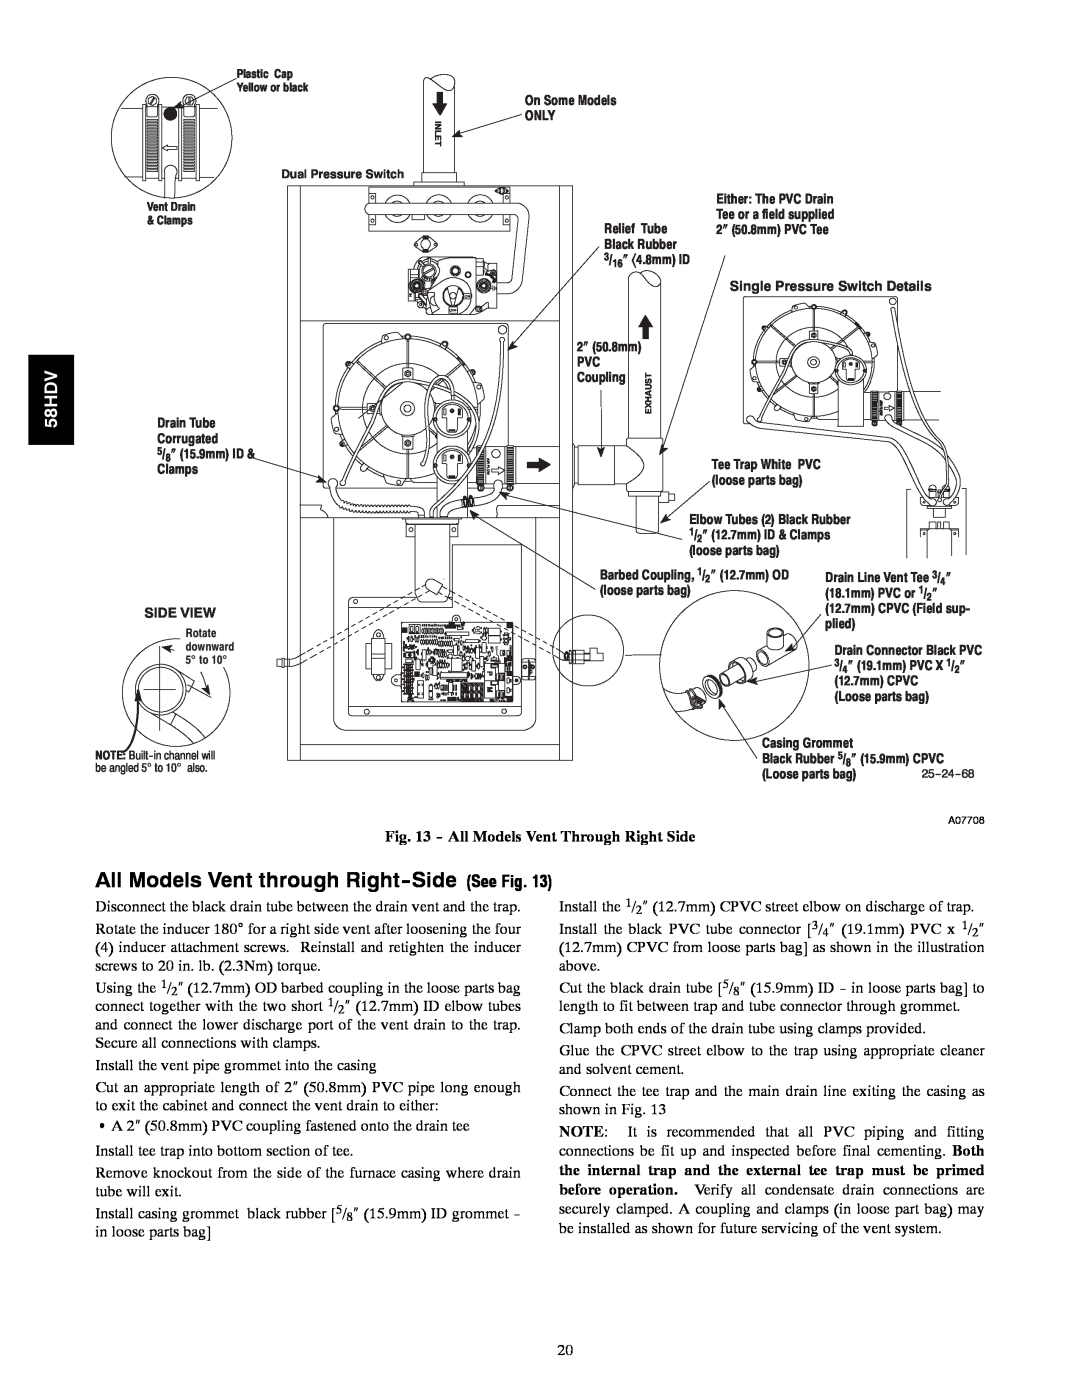 Carrier 58HDV installation instructions All Models Vent through Right-Side See Fig, All Models Vent Through Right Side 